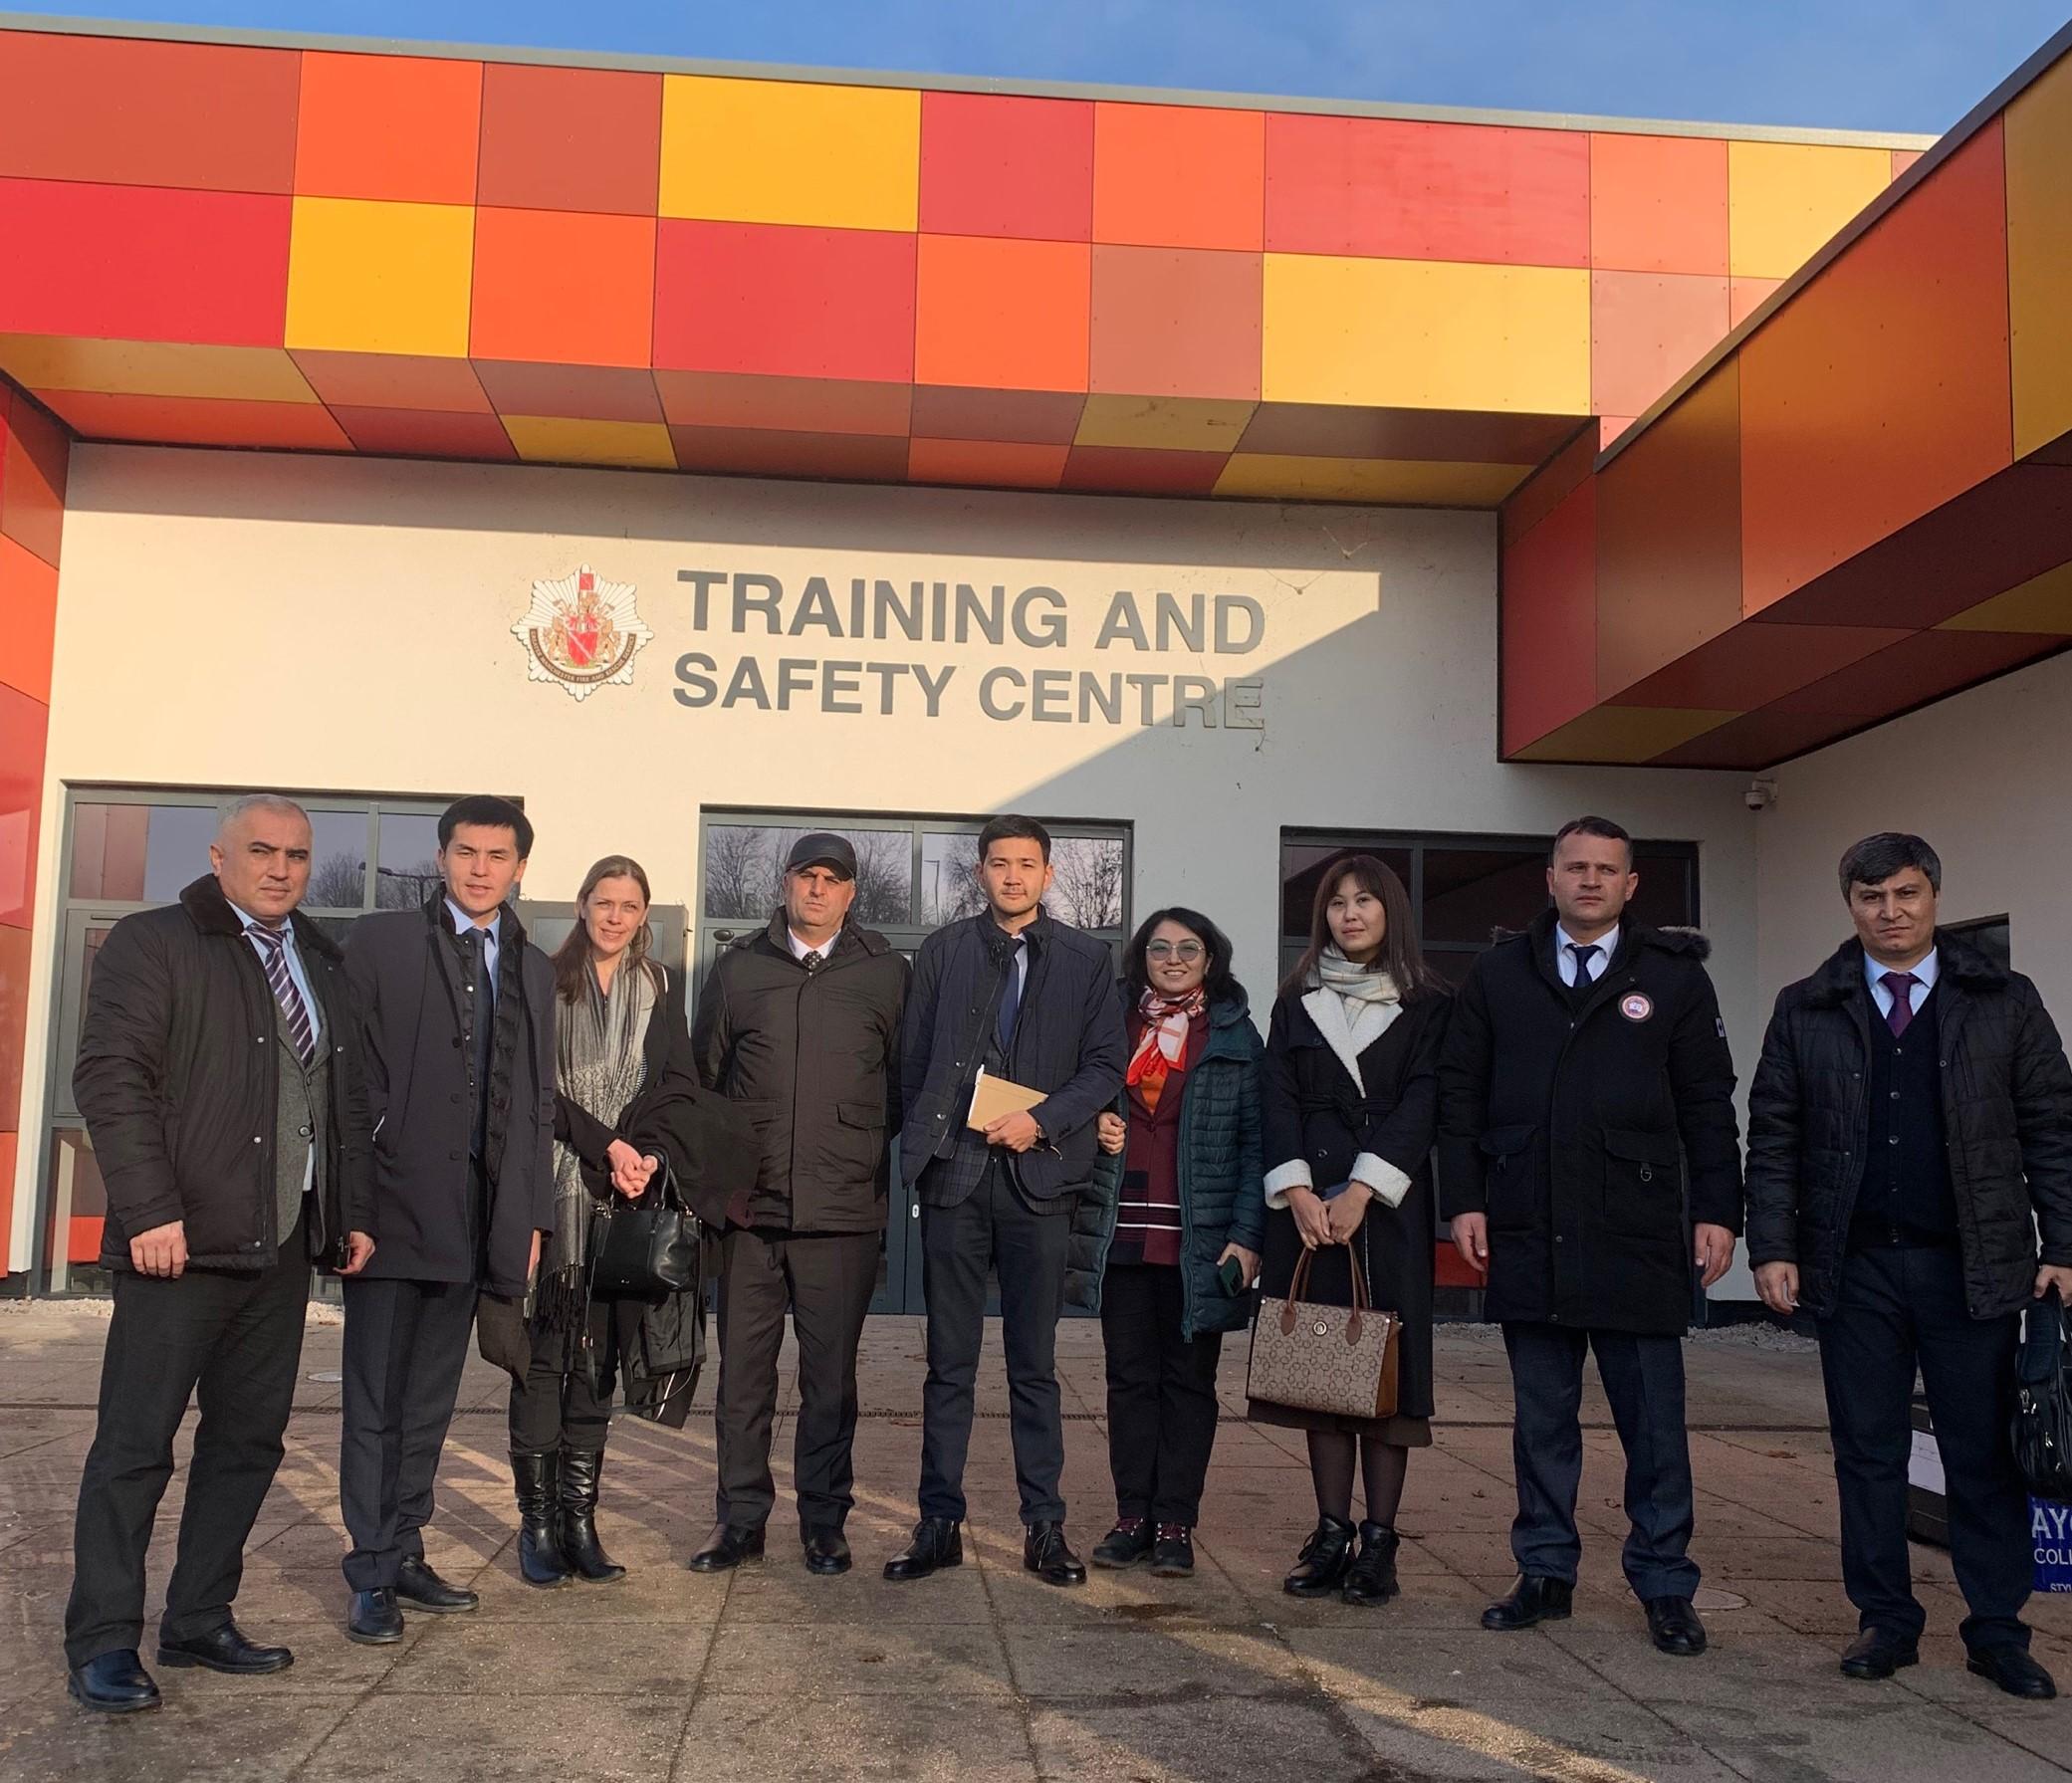 Participants in Bury, Greater Manchester, at the Training and Safety Centre, the largest Fire-Fighter training facility in the UK.